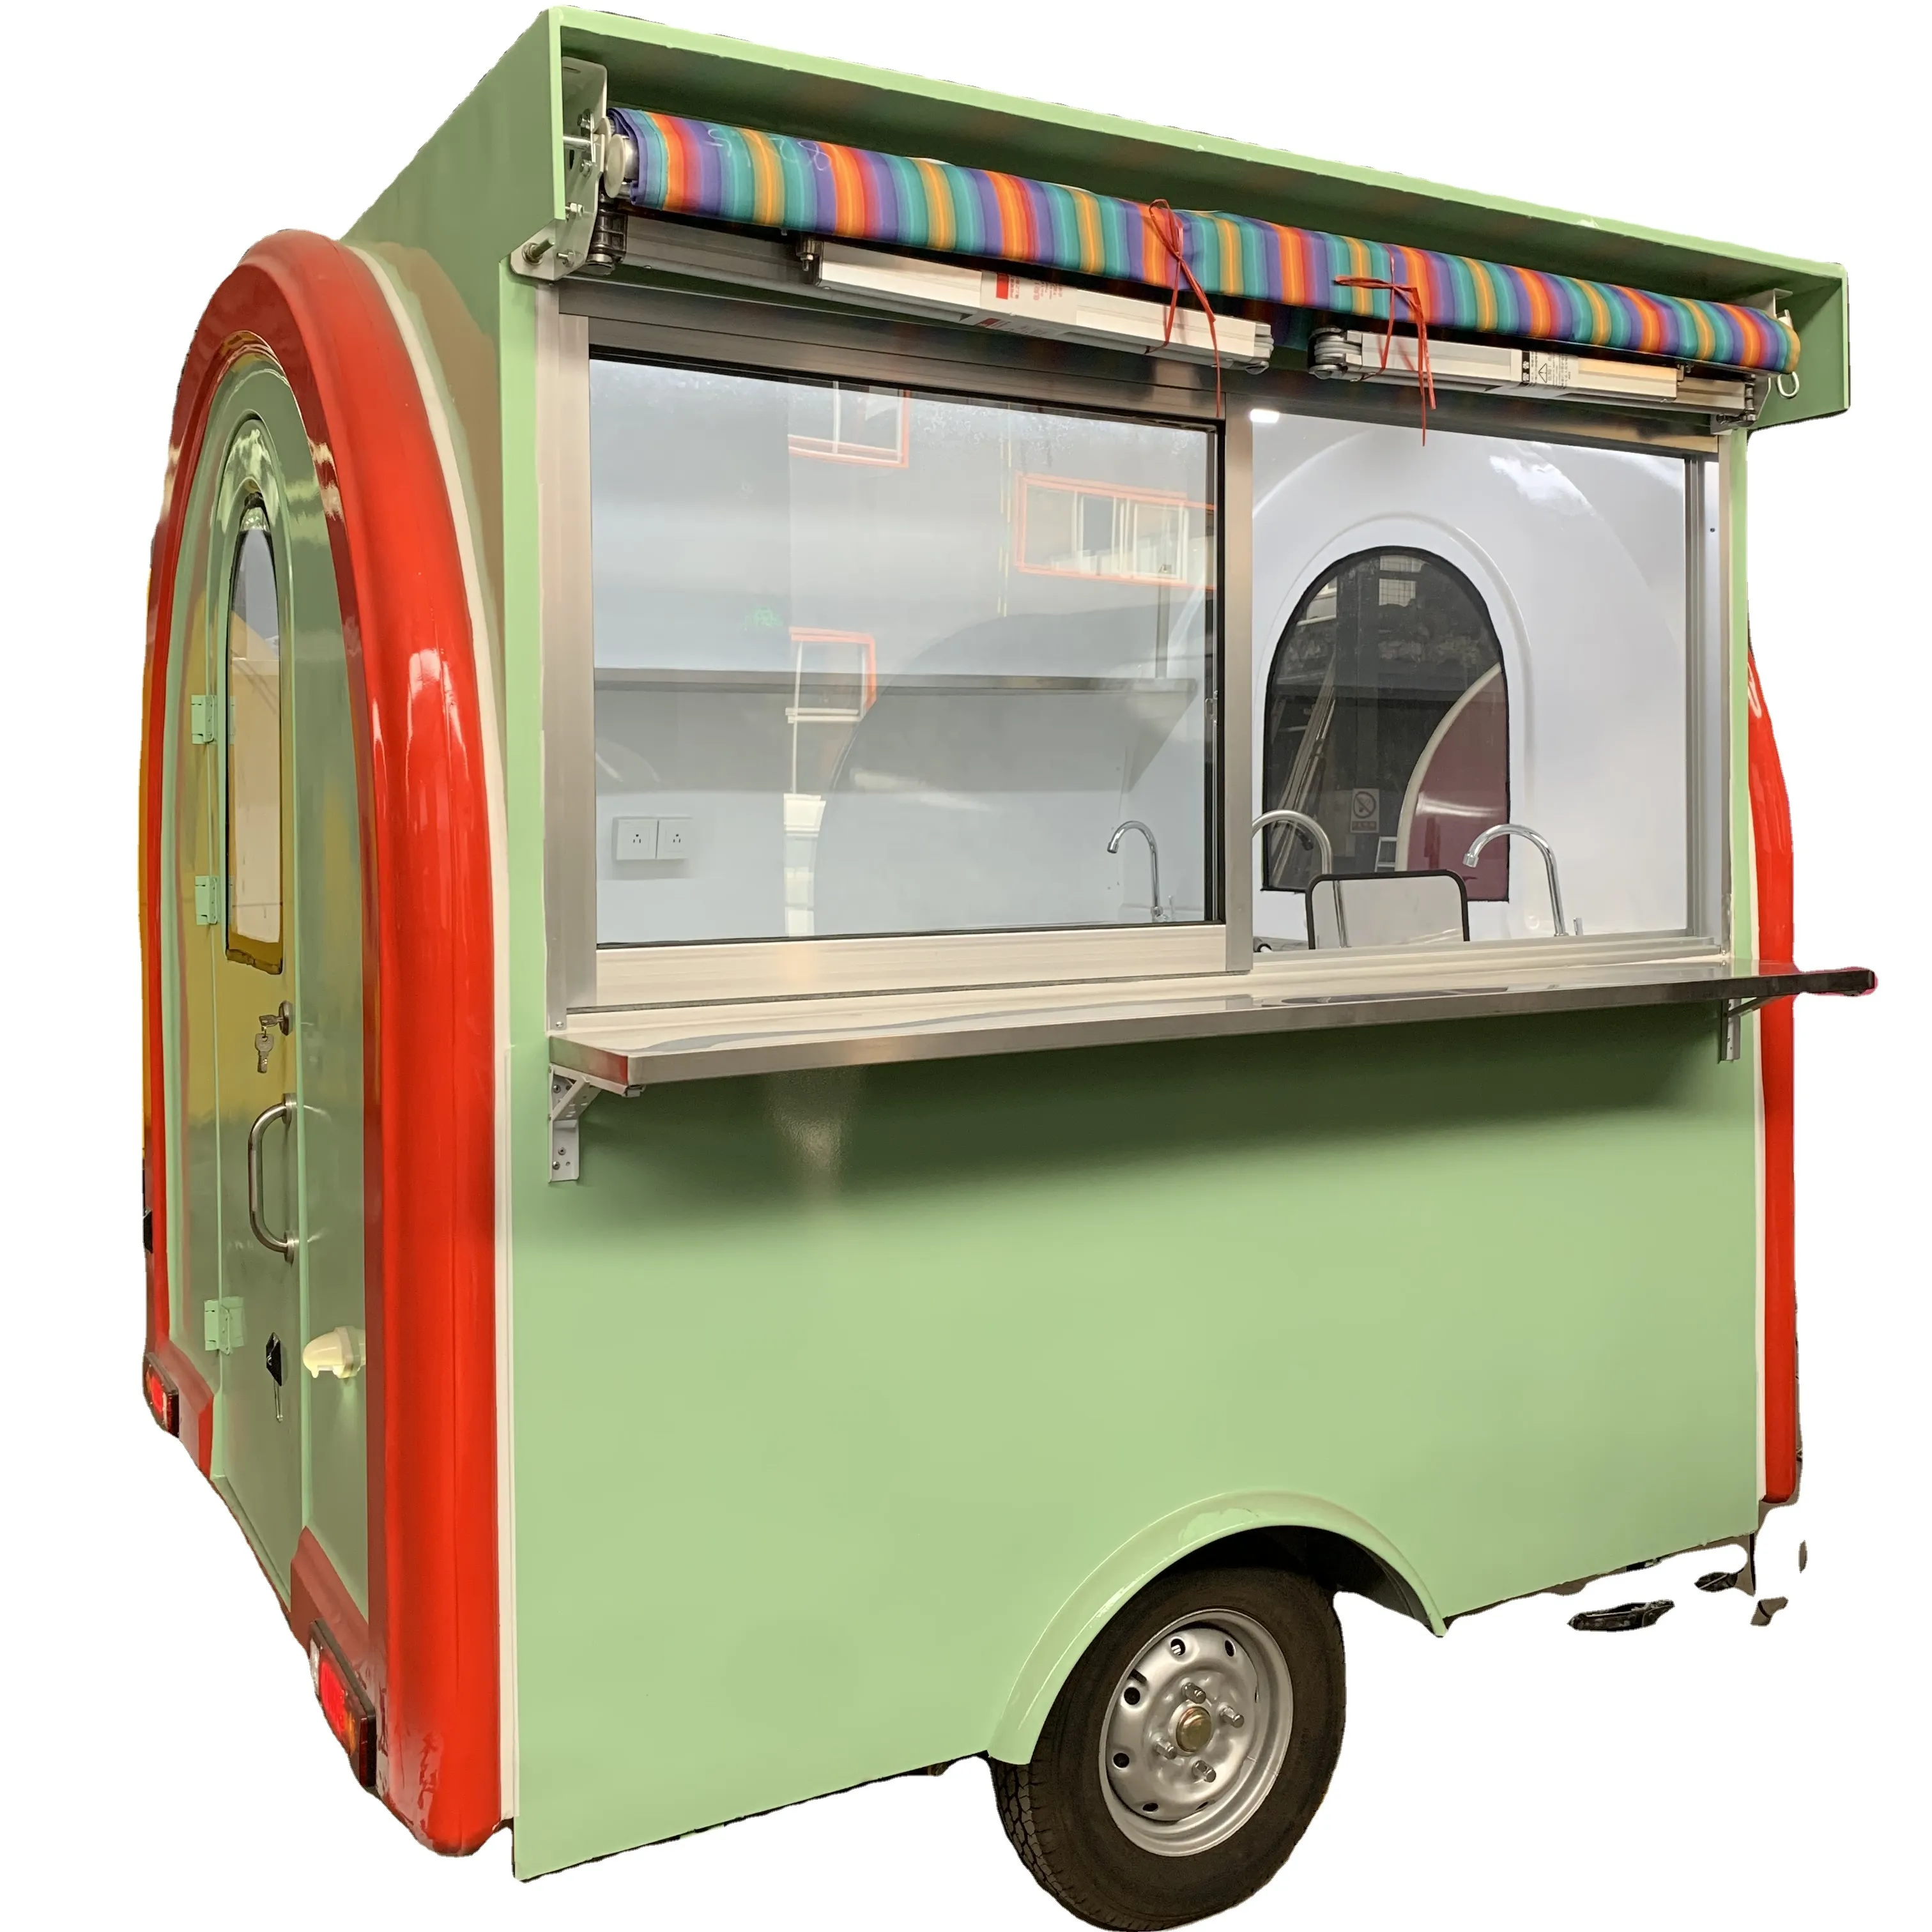 Round fast food truck ice cream cart mobile fast food carts and food trailers with sunshade